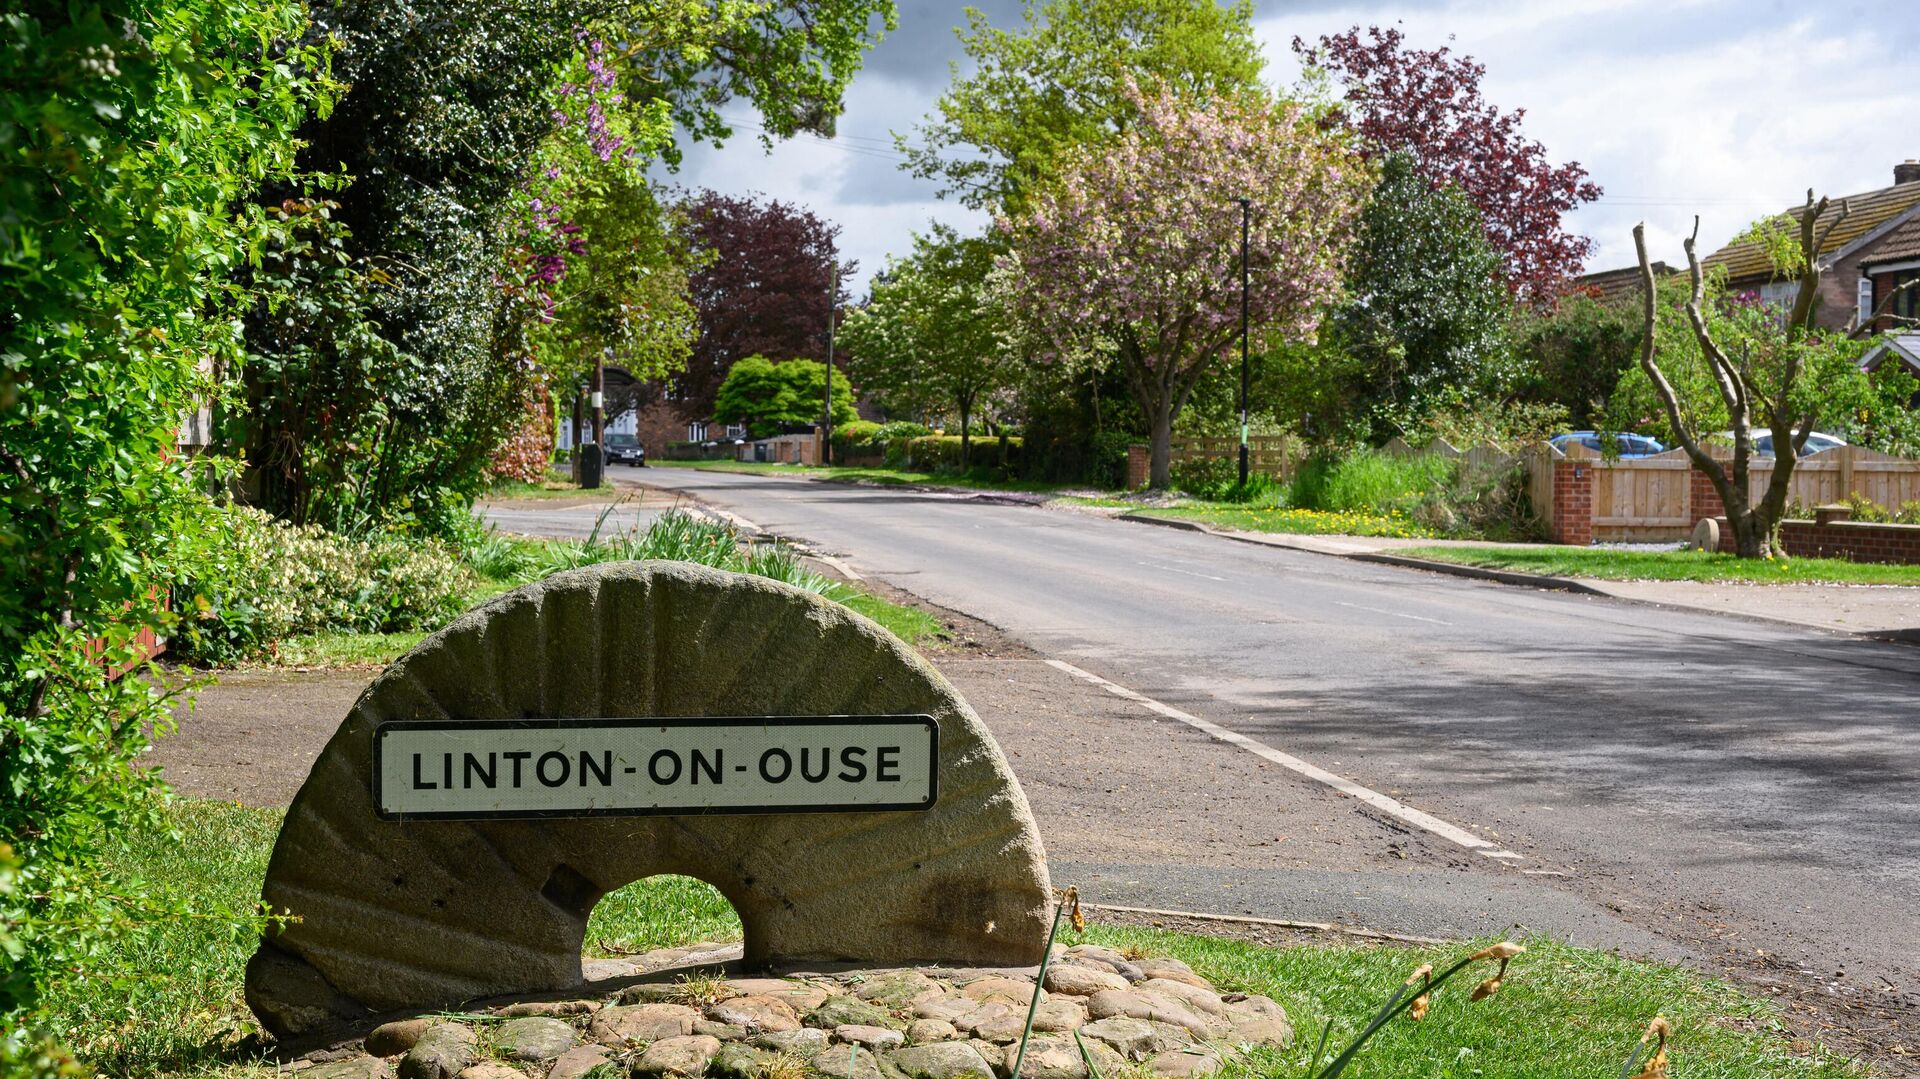 A sign for the village is pictured in the village of Linton-on-Ouse, near York in northern England on May 4, 2022. - The village of Linton-on-Ouse is usually a sleepy place, but its residents are up in arms at a government plan to house over a thousand asylum seekers, whose numbers will dwarf local residents. - Sputnik International, 1920, 08.05.2022